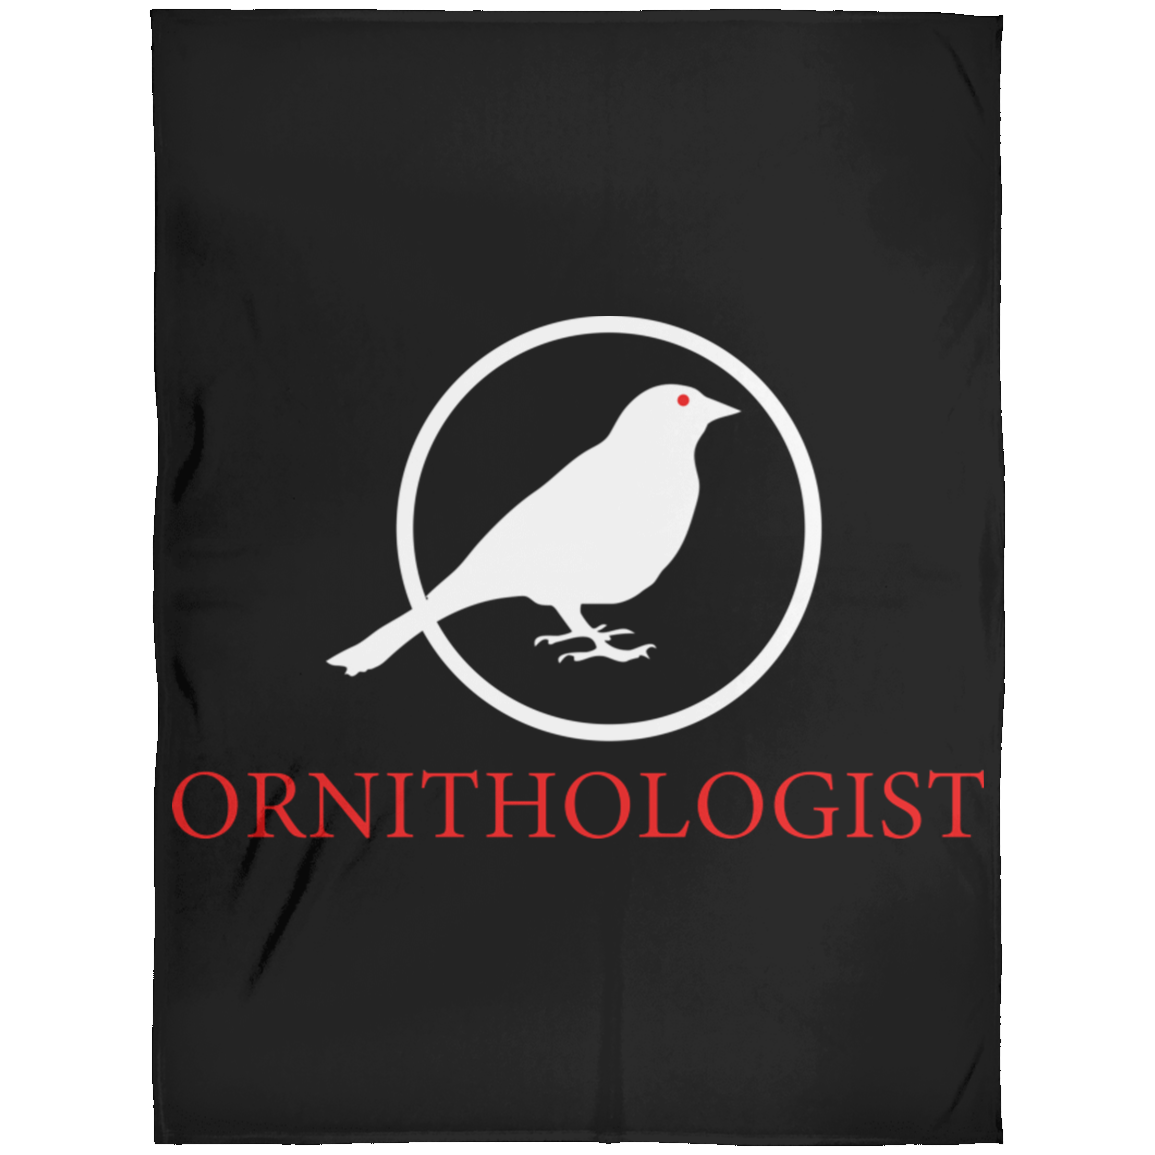 OPG Custom Design #24. Ornithologist. A person who studies or is an expert on birds. Fleece Blanket 60x80